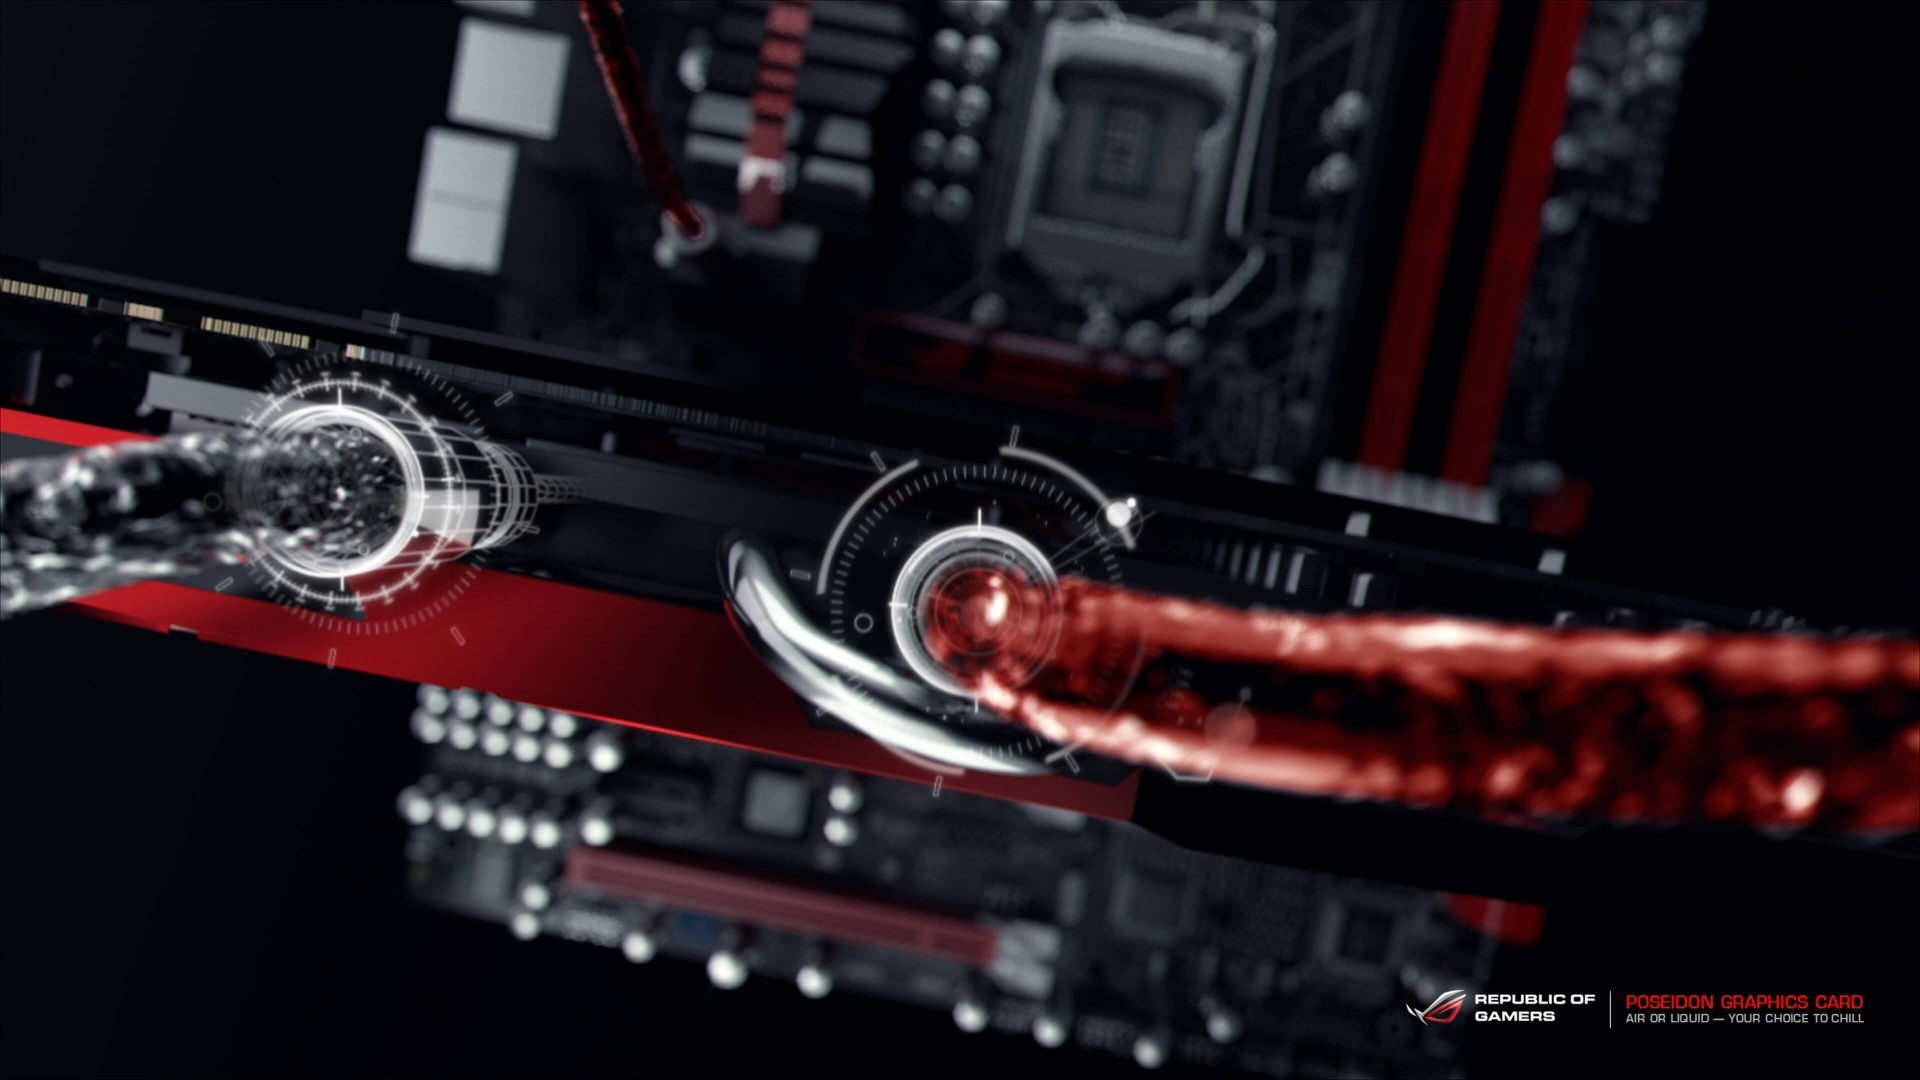 General 1920x1080 ASUS liquid cooling fan technology PC gaming water cooling Republic of Gamers hardware computer